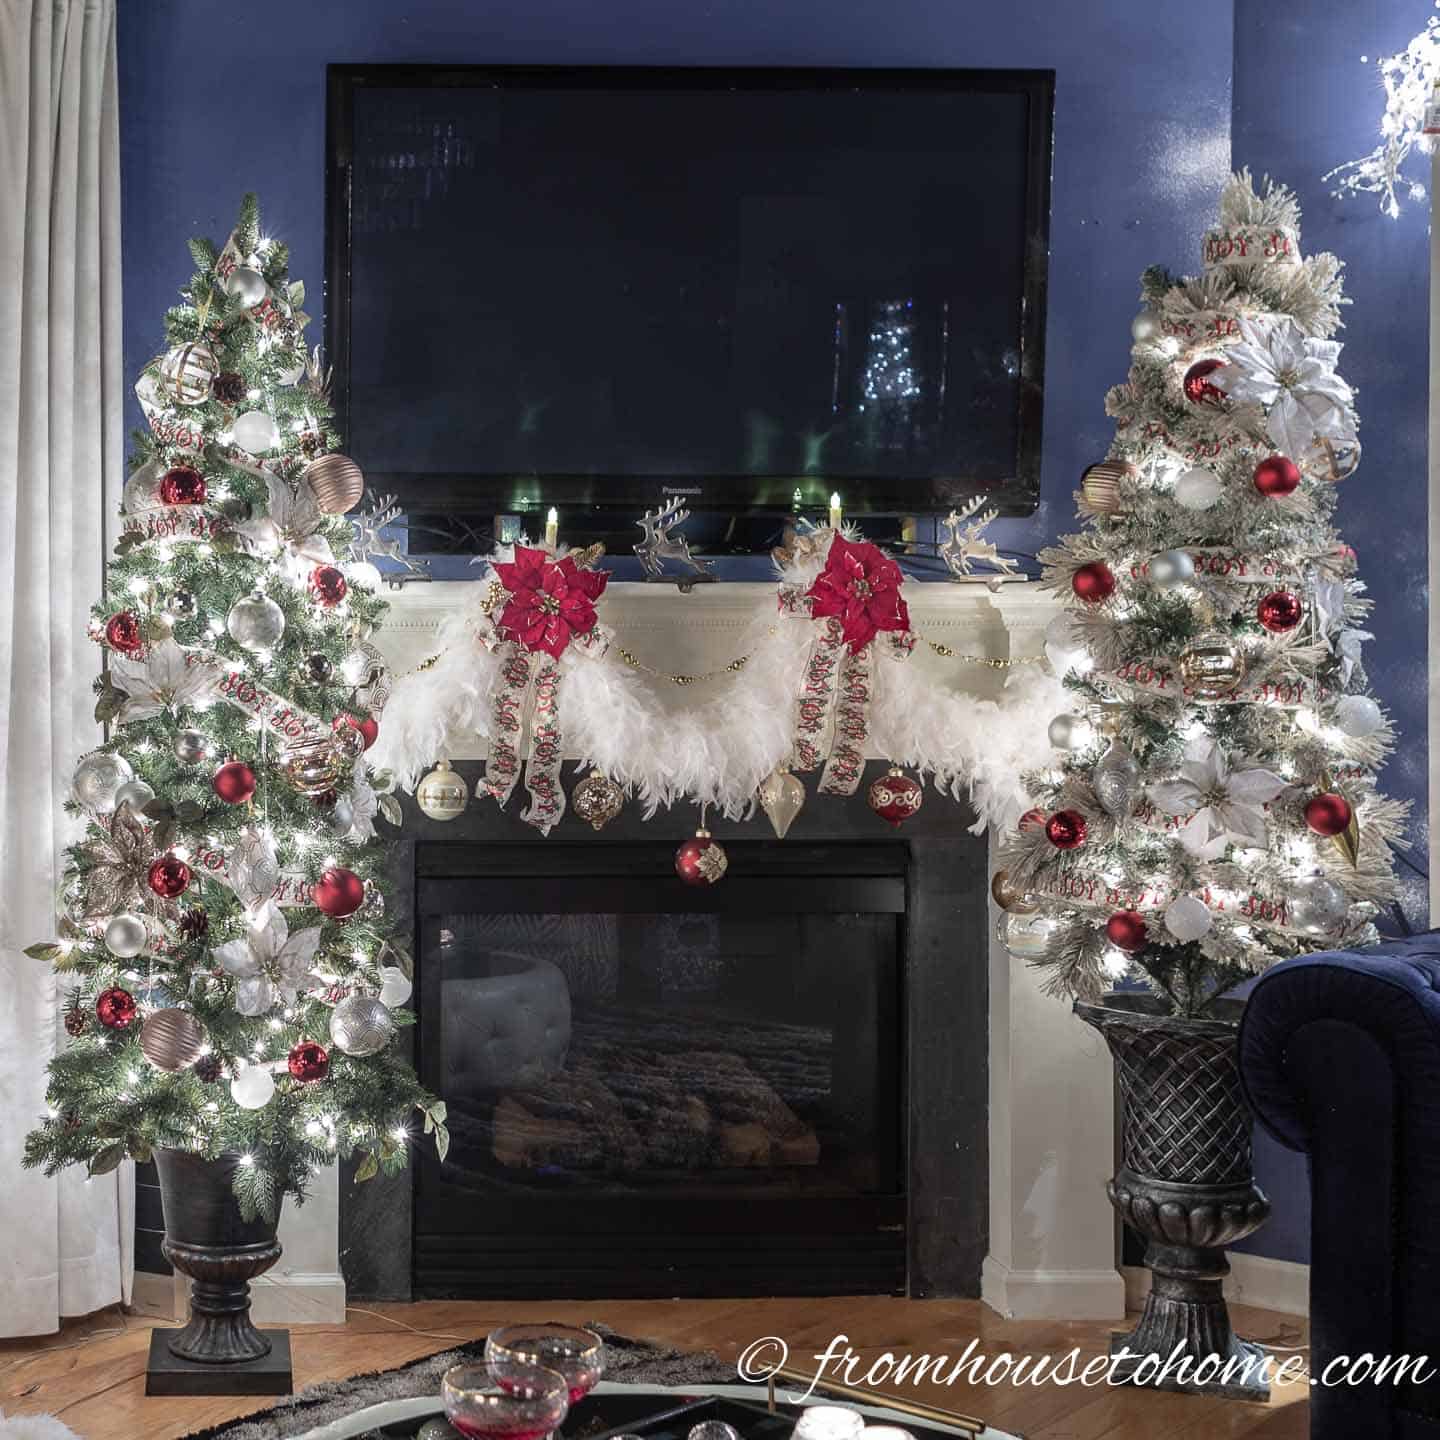 Two red, white and gold Christmas trees on either side of the fireplace